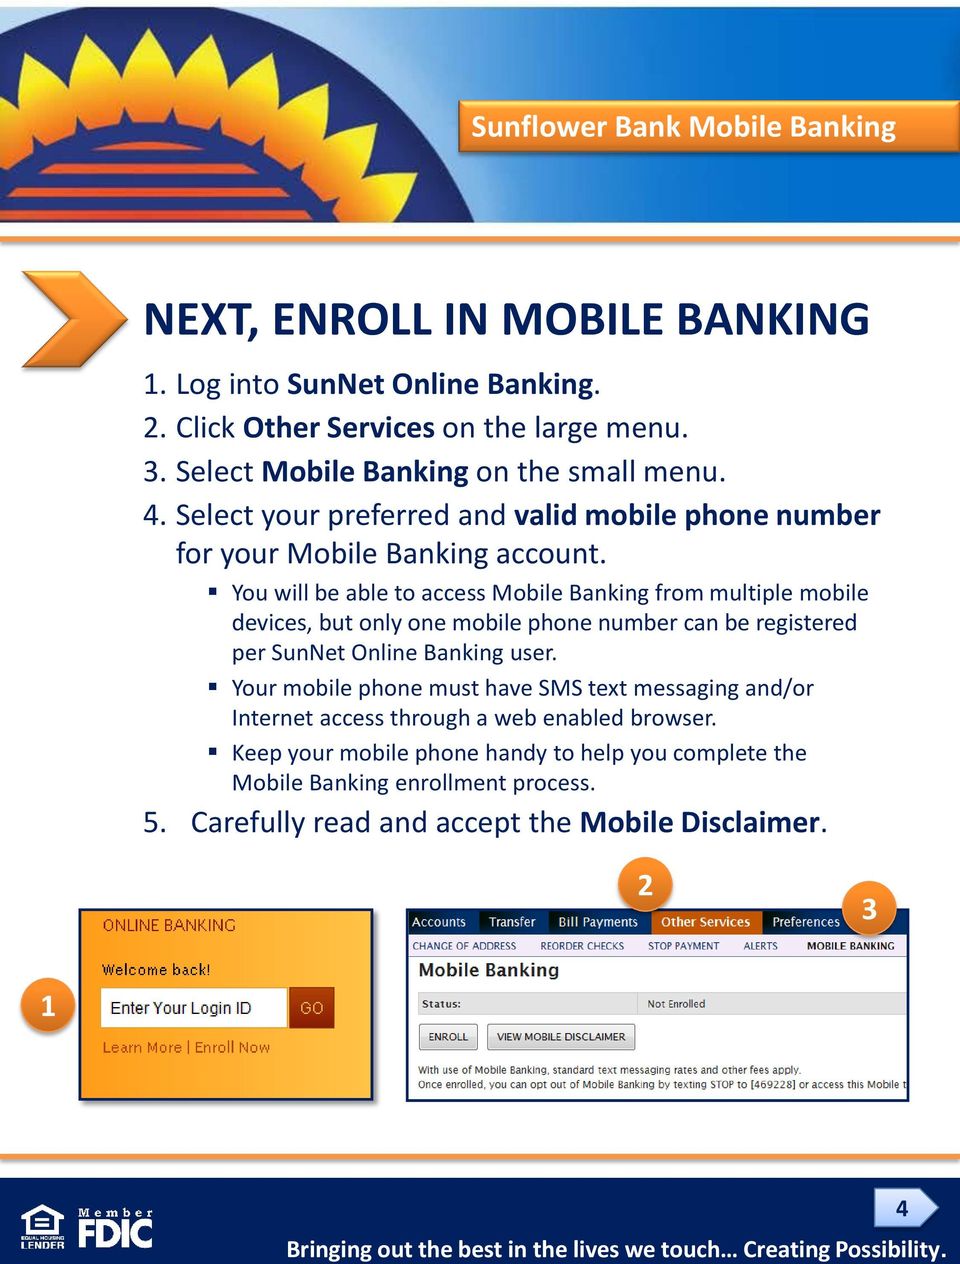 You will be able to access Mobile Banking from multiple mobile devices, but only one mobile phone number can be registered per SunNet Online Banking user.